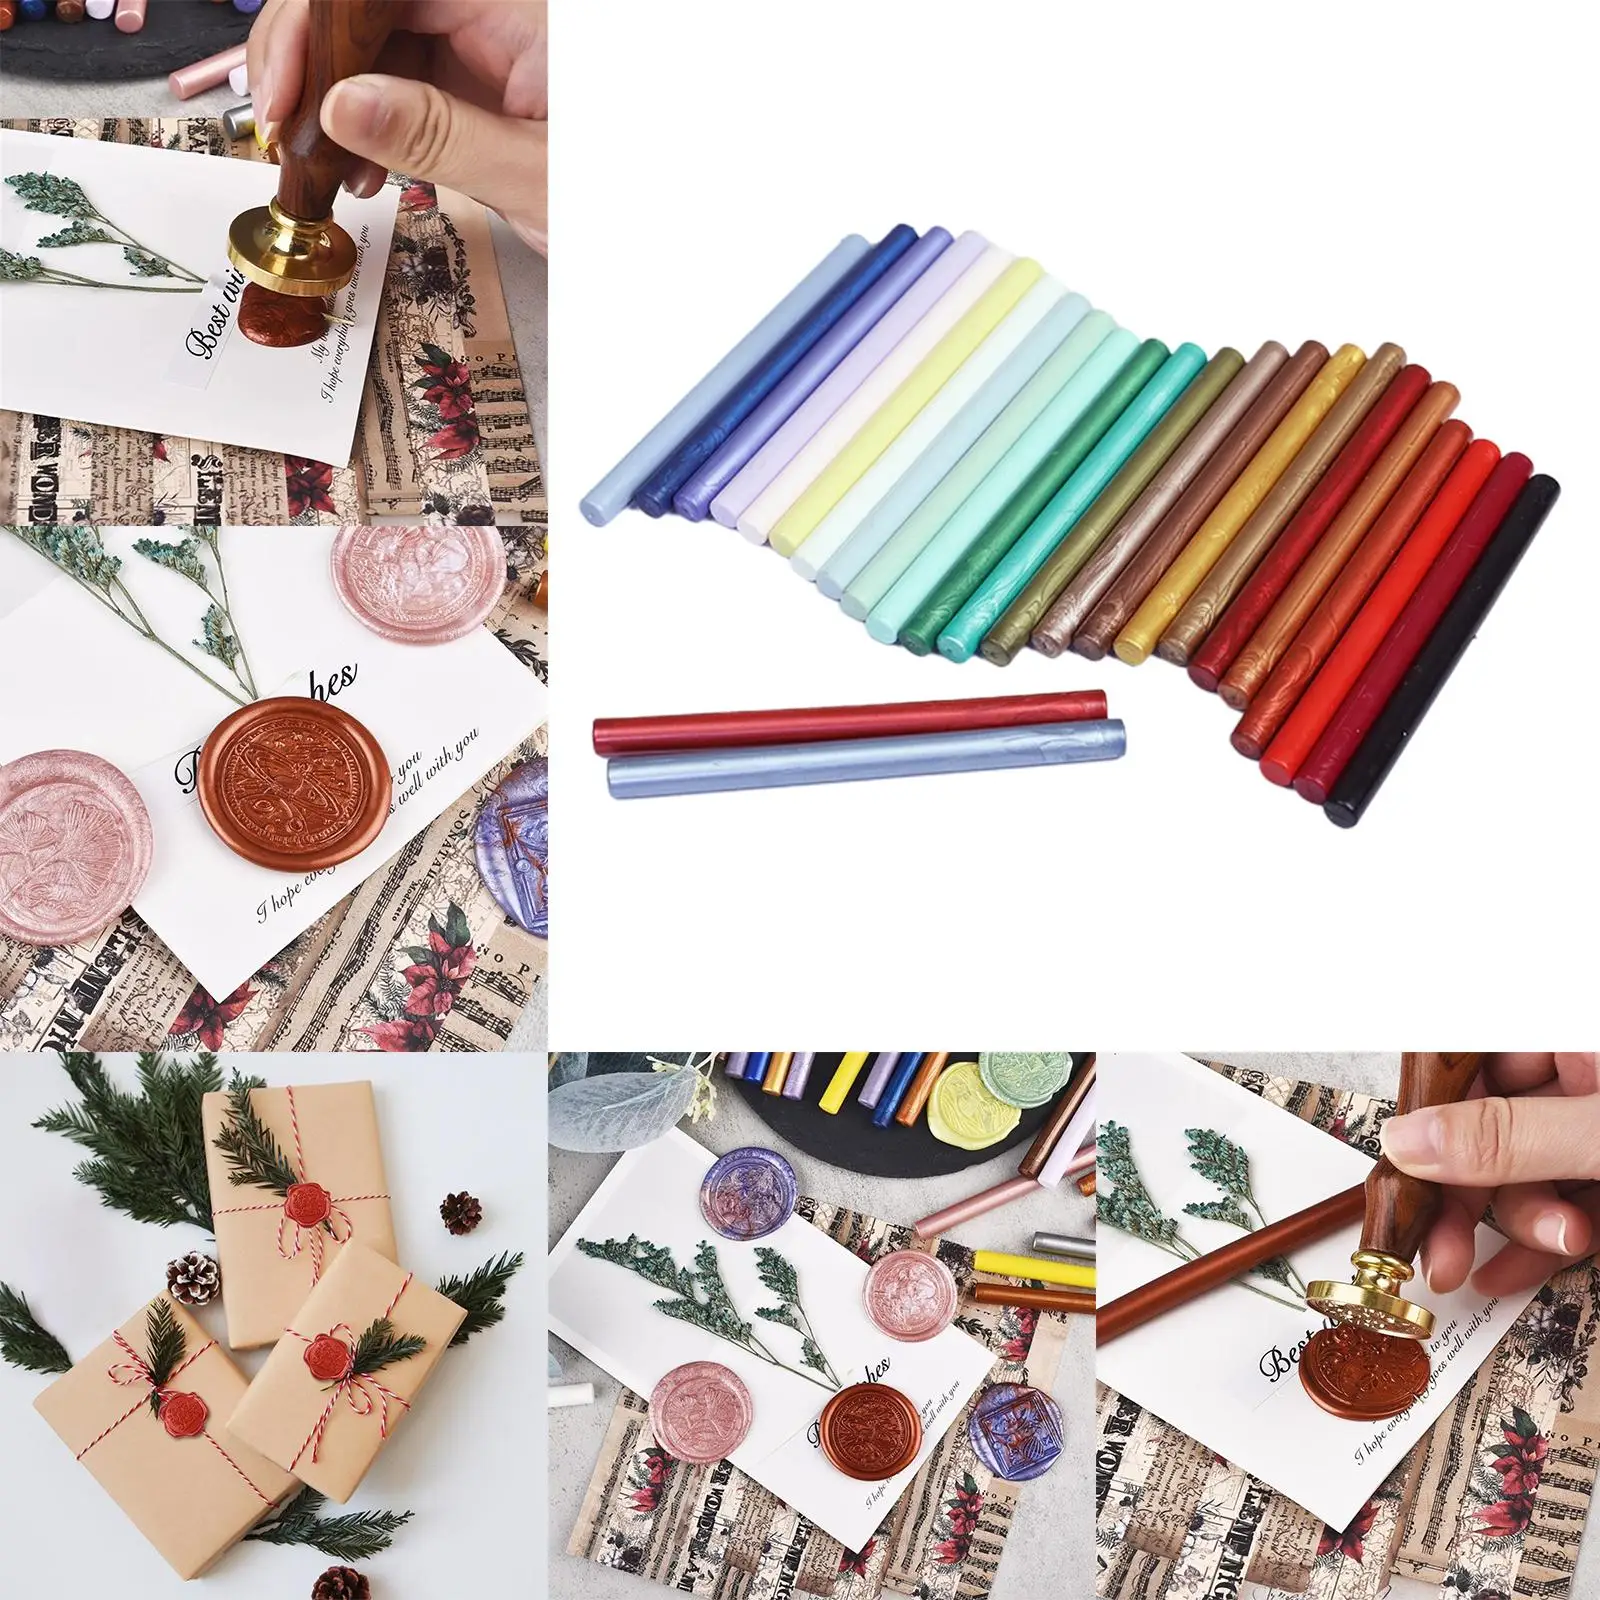 25x sealing wax Rods DIY Mixed Colors Melting Sealing Wax Rods for Cards Envelopes Packages Crafts Wedding Invitations